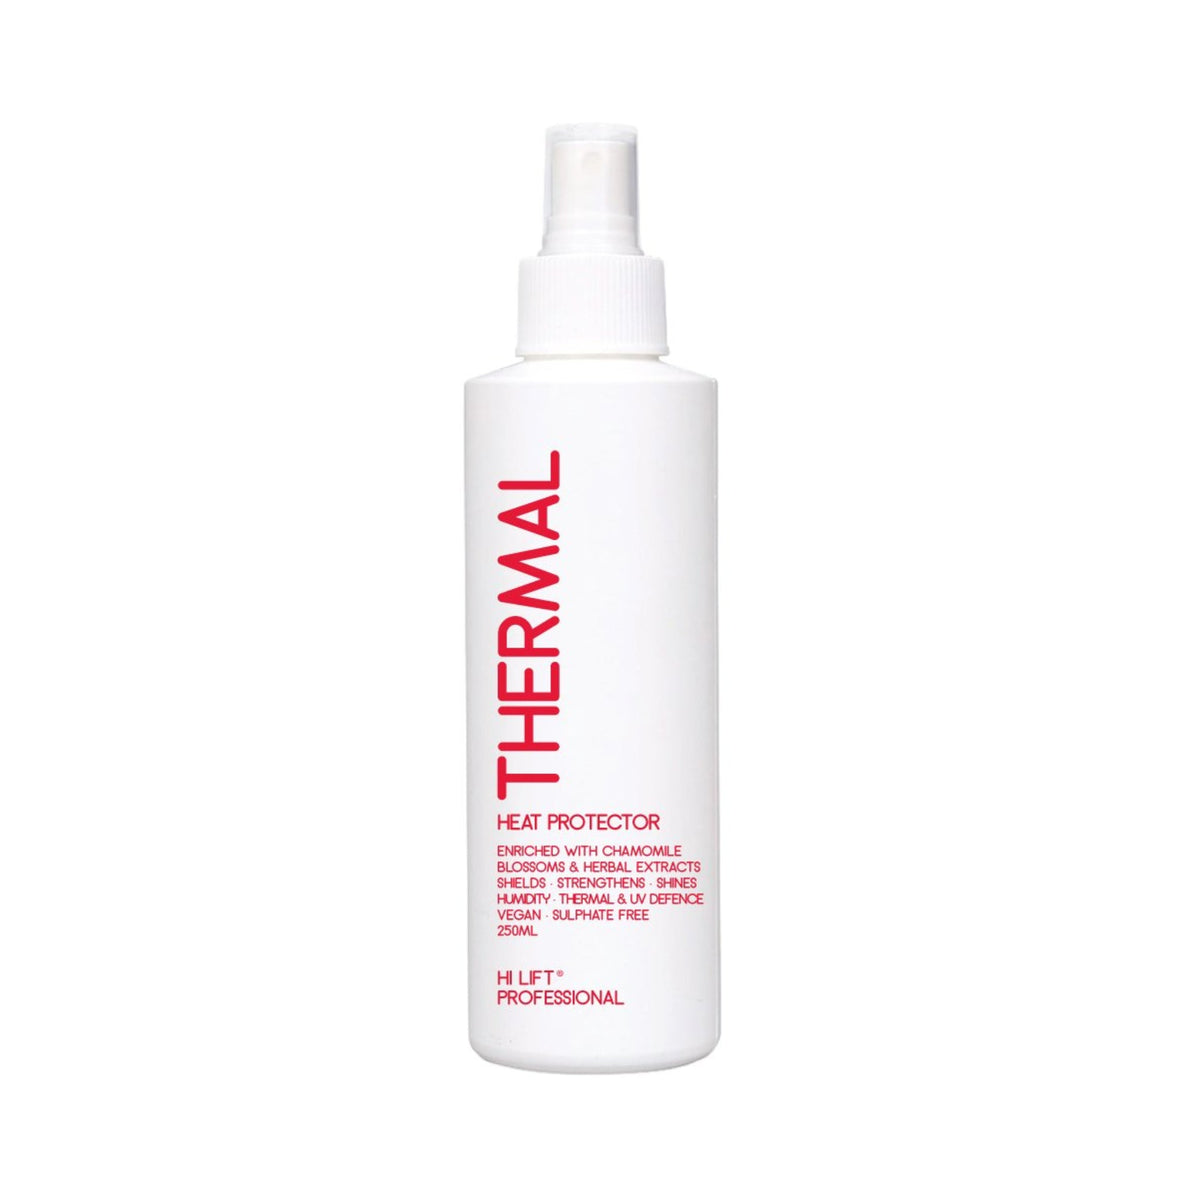 Hi Lift thermal Heat Protector - Haircare Superstore